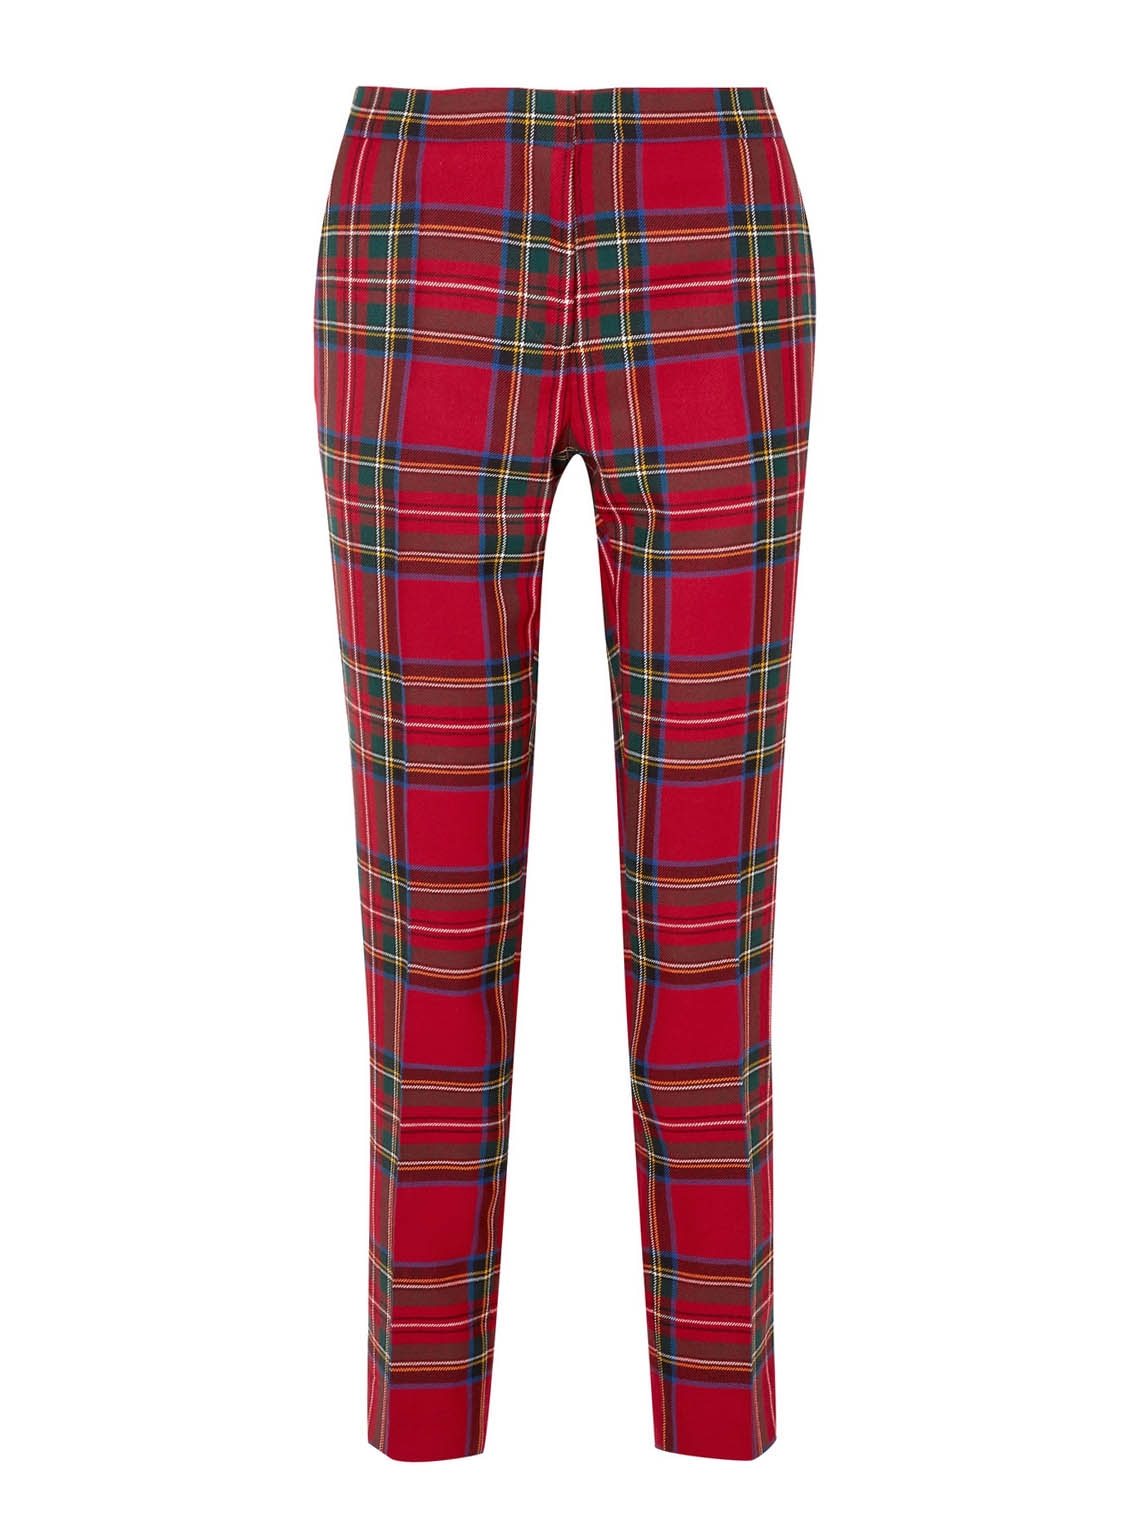 Monarch Subjectief Uitdaging Boutique BURBERRY Red and green plaid print wool slim fit pants Retail  price €550 Size XS